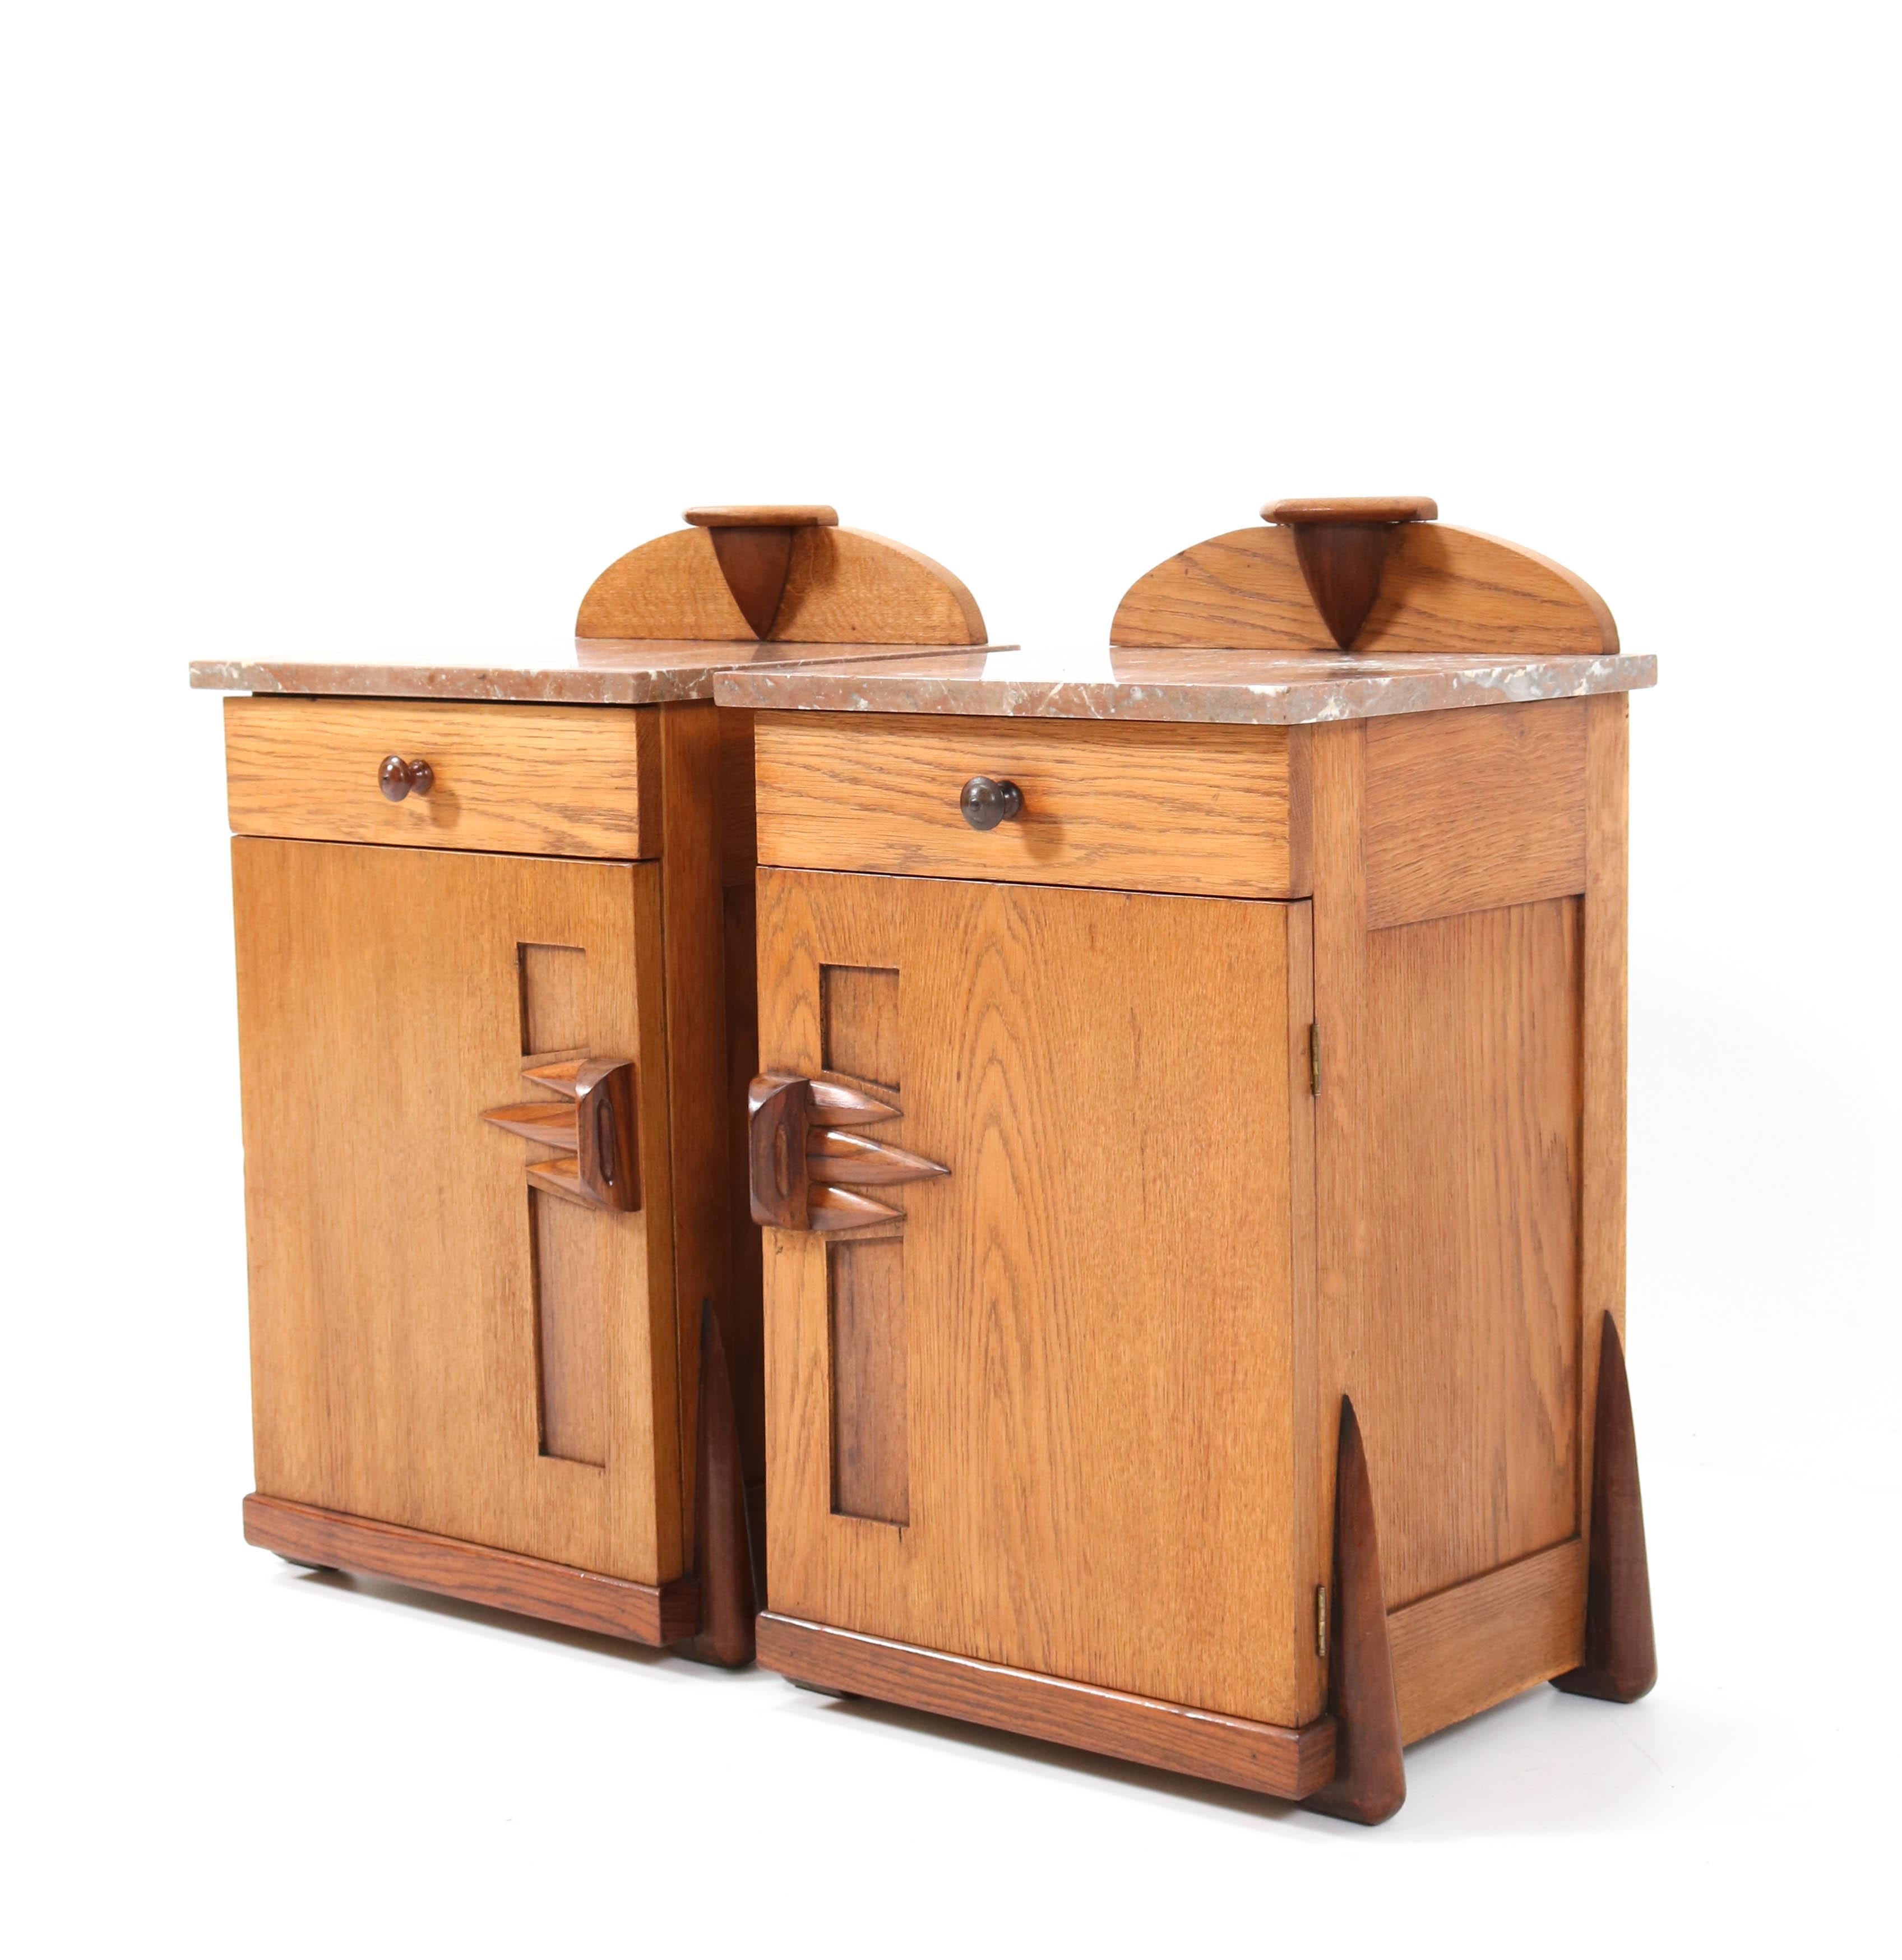 Early 20th Century Two Oak Art Deco Amsterdamse School Nightstands or Bedside Tables by Max Coini